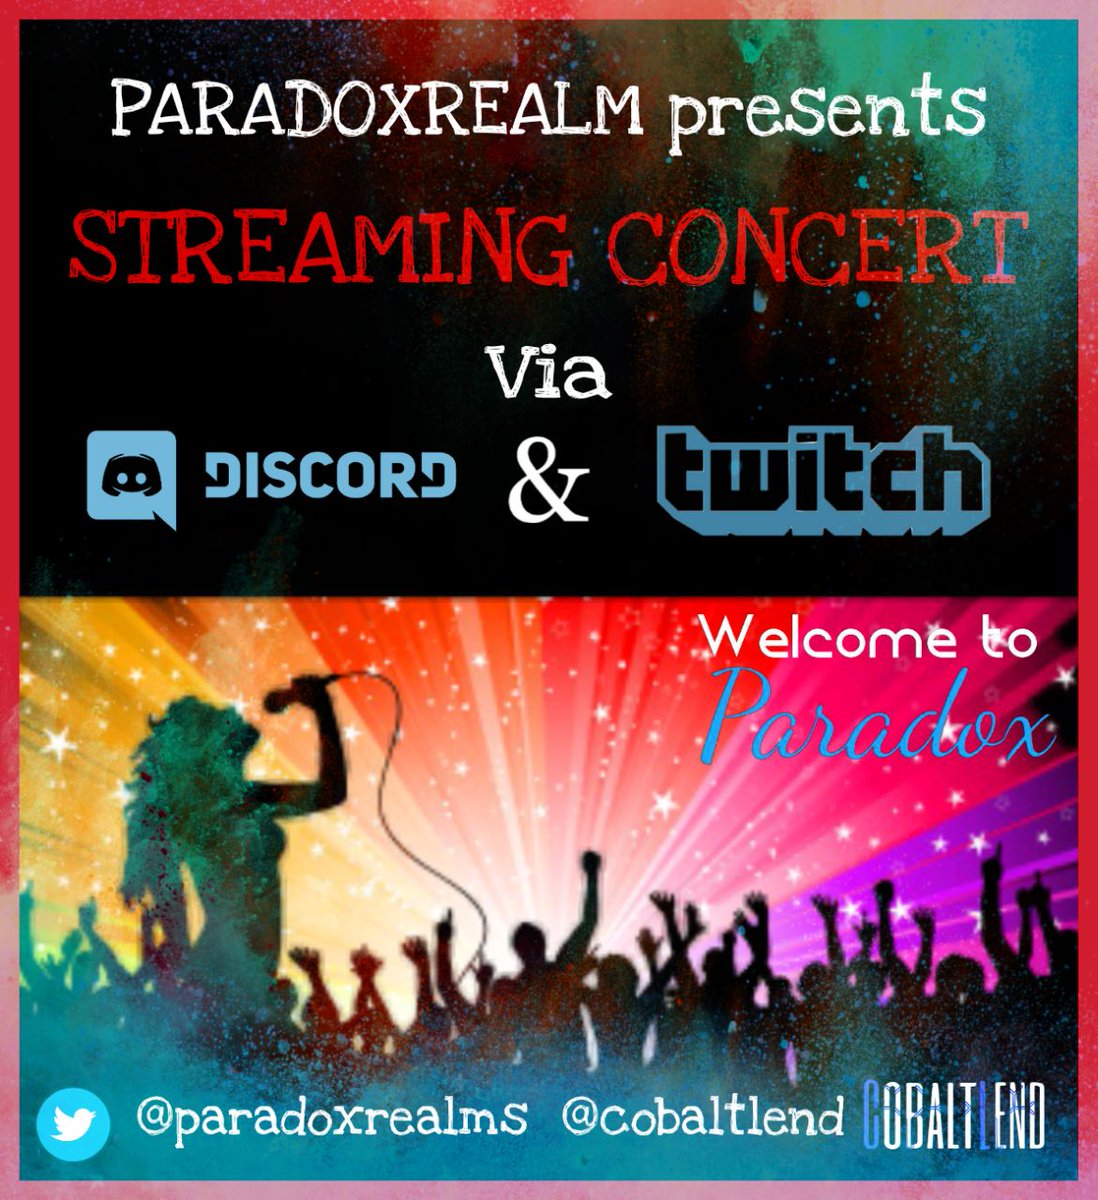 Benefit Web3 concert on the 28th via @CobaltLend and @ParadoxRealms #nftart #NFTCommunity #NFTGiveaway #music #Web3 #Metaverse #cryptocurrency #Crypto #blockchain @MySwilly @Tater_Poutine @Nuls @discord @Twitch